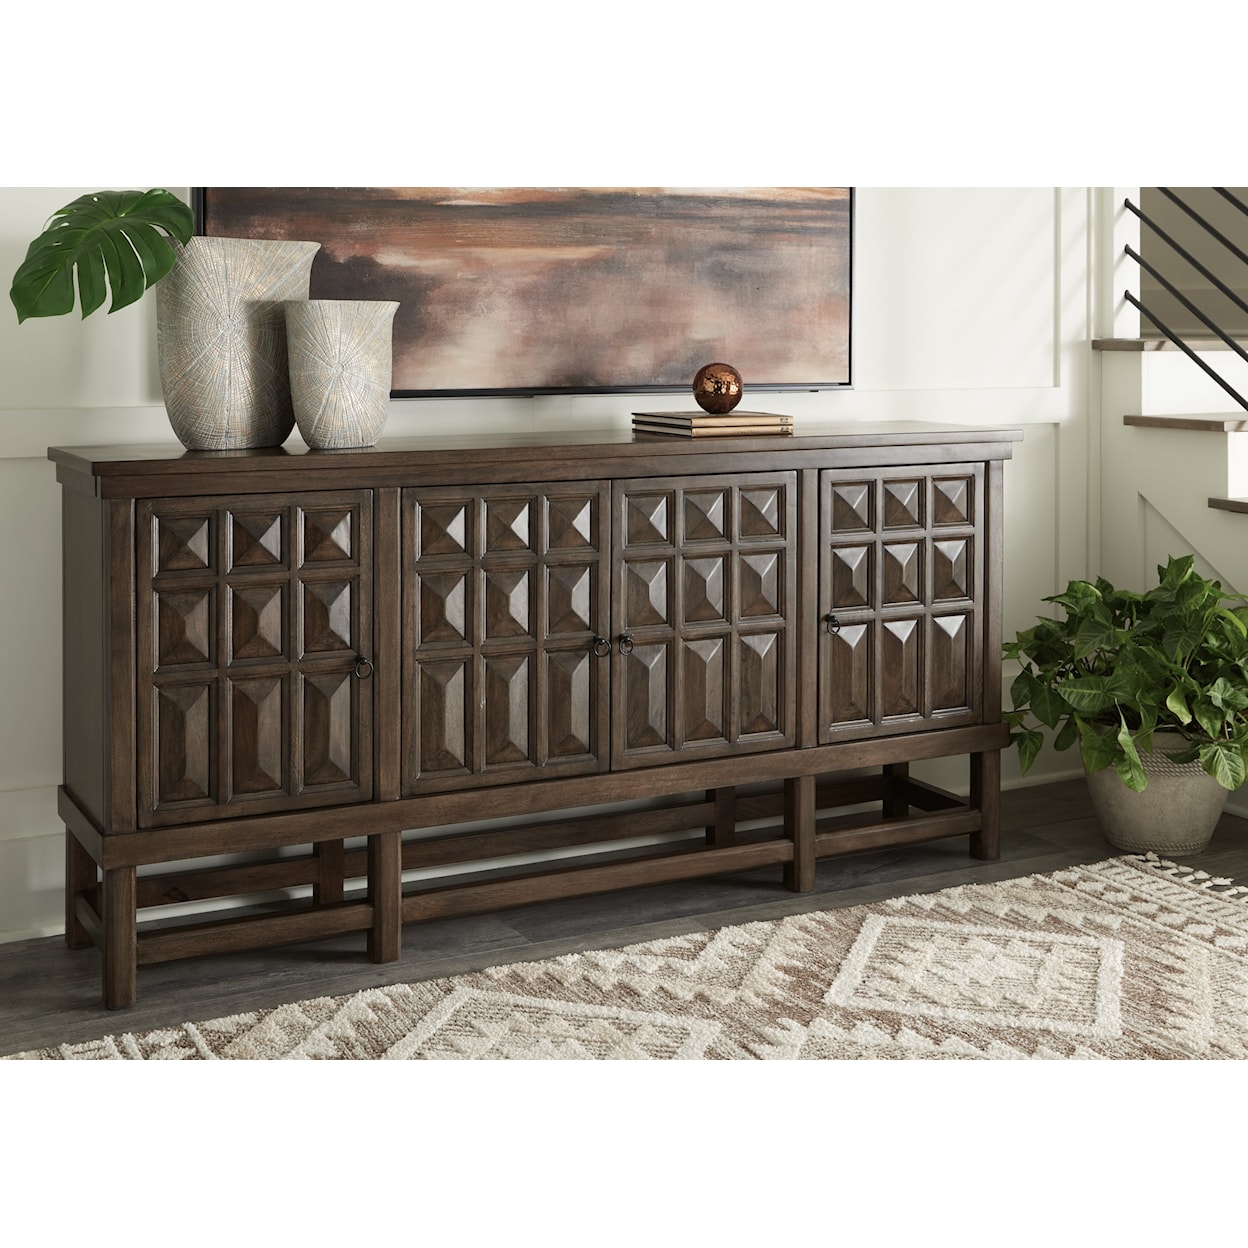 Signature Design by Ashley Braunell Accent Cabinet